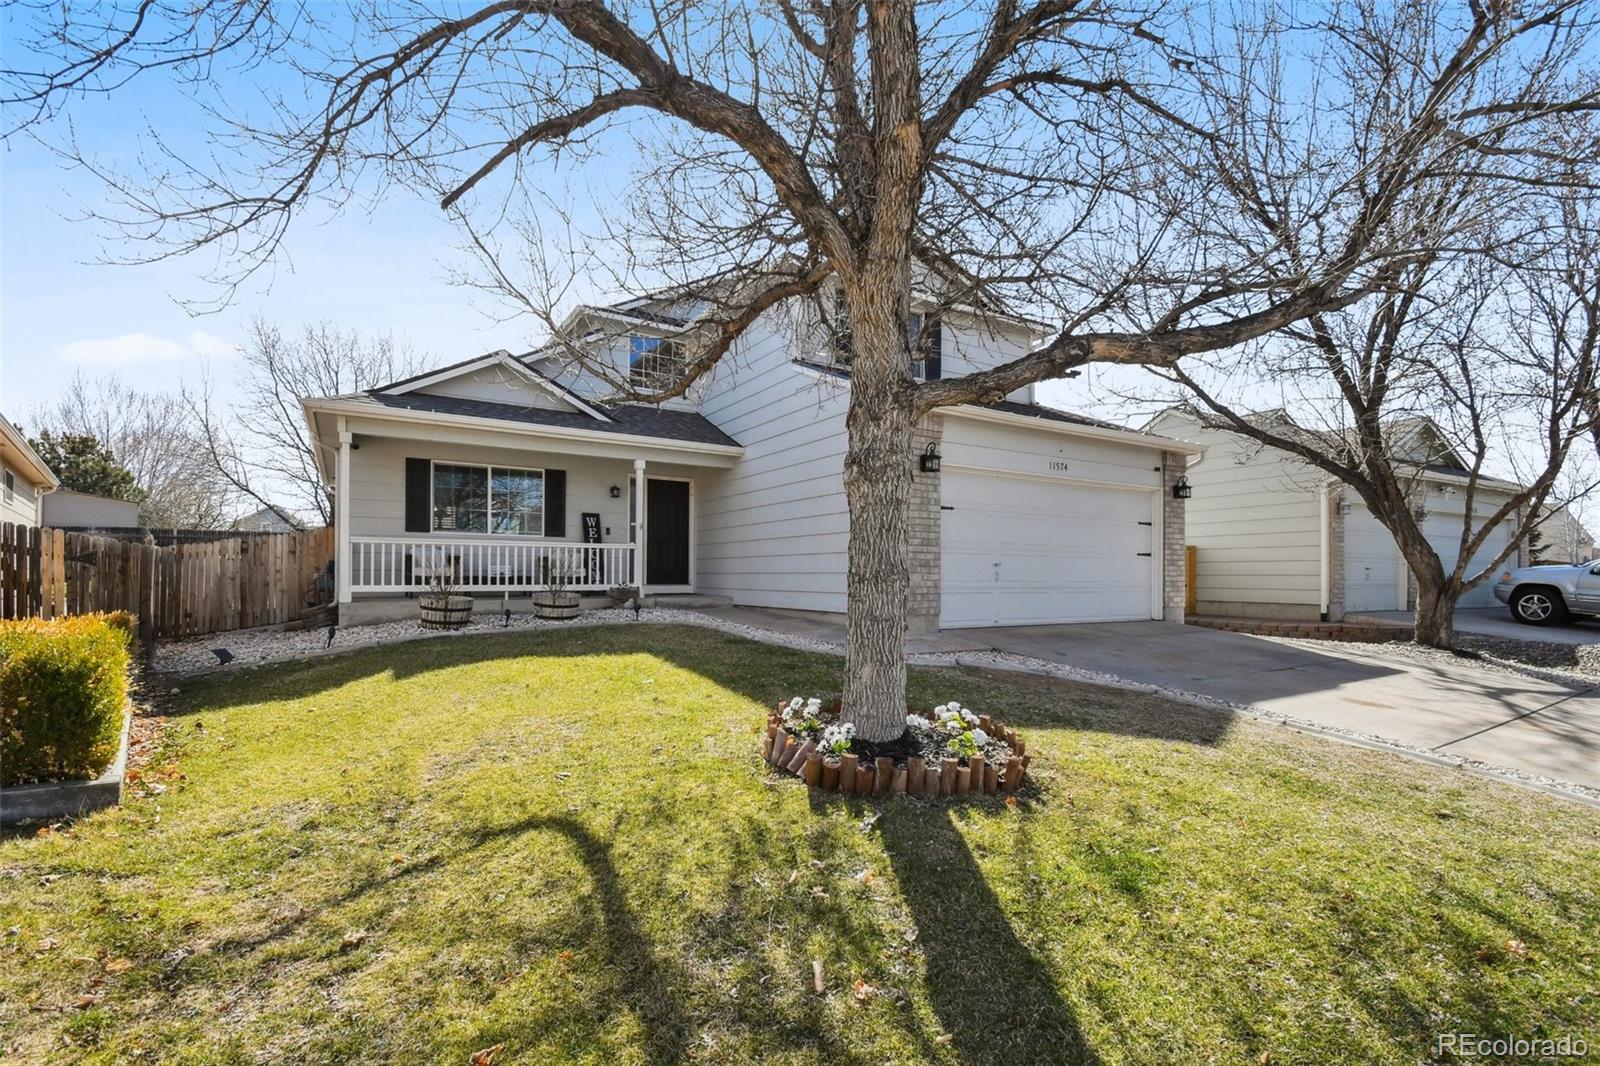 11574  river run parkway, commerce city sold home. Closed on 2024-05-01 for $527,000.